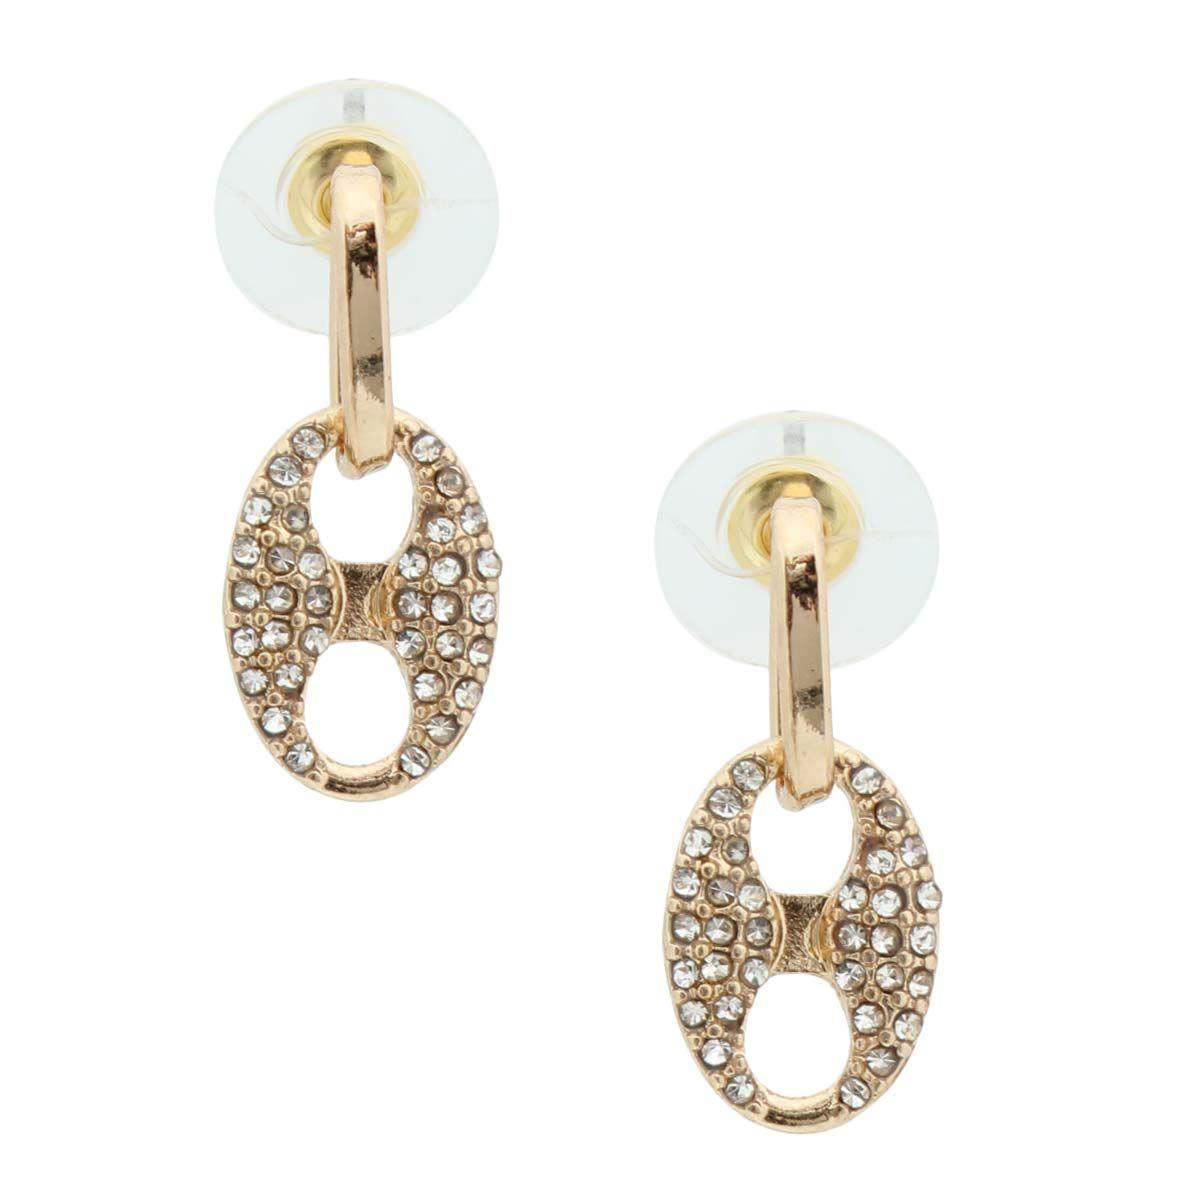 Stunning Gold Plated Matelot Earrings: Must-Have Fashion Accessory